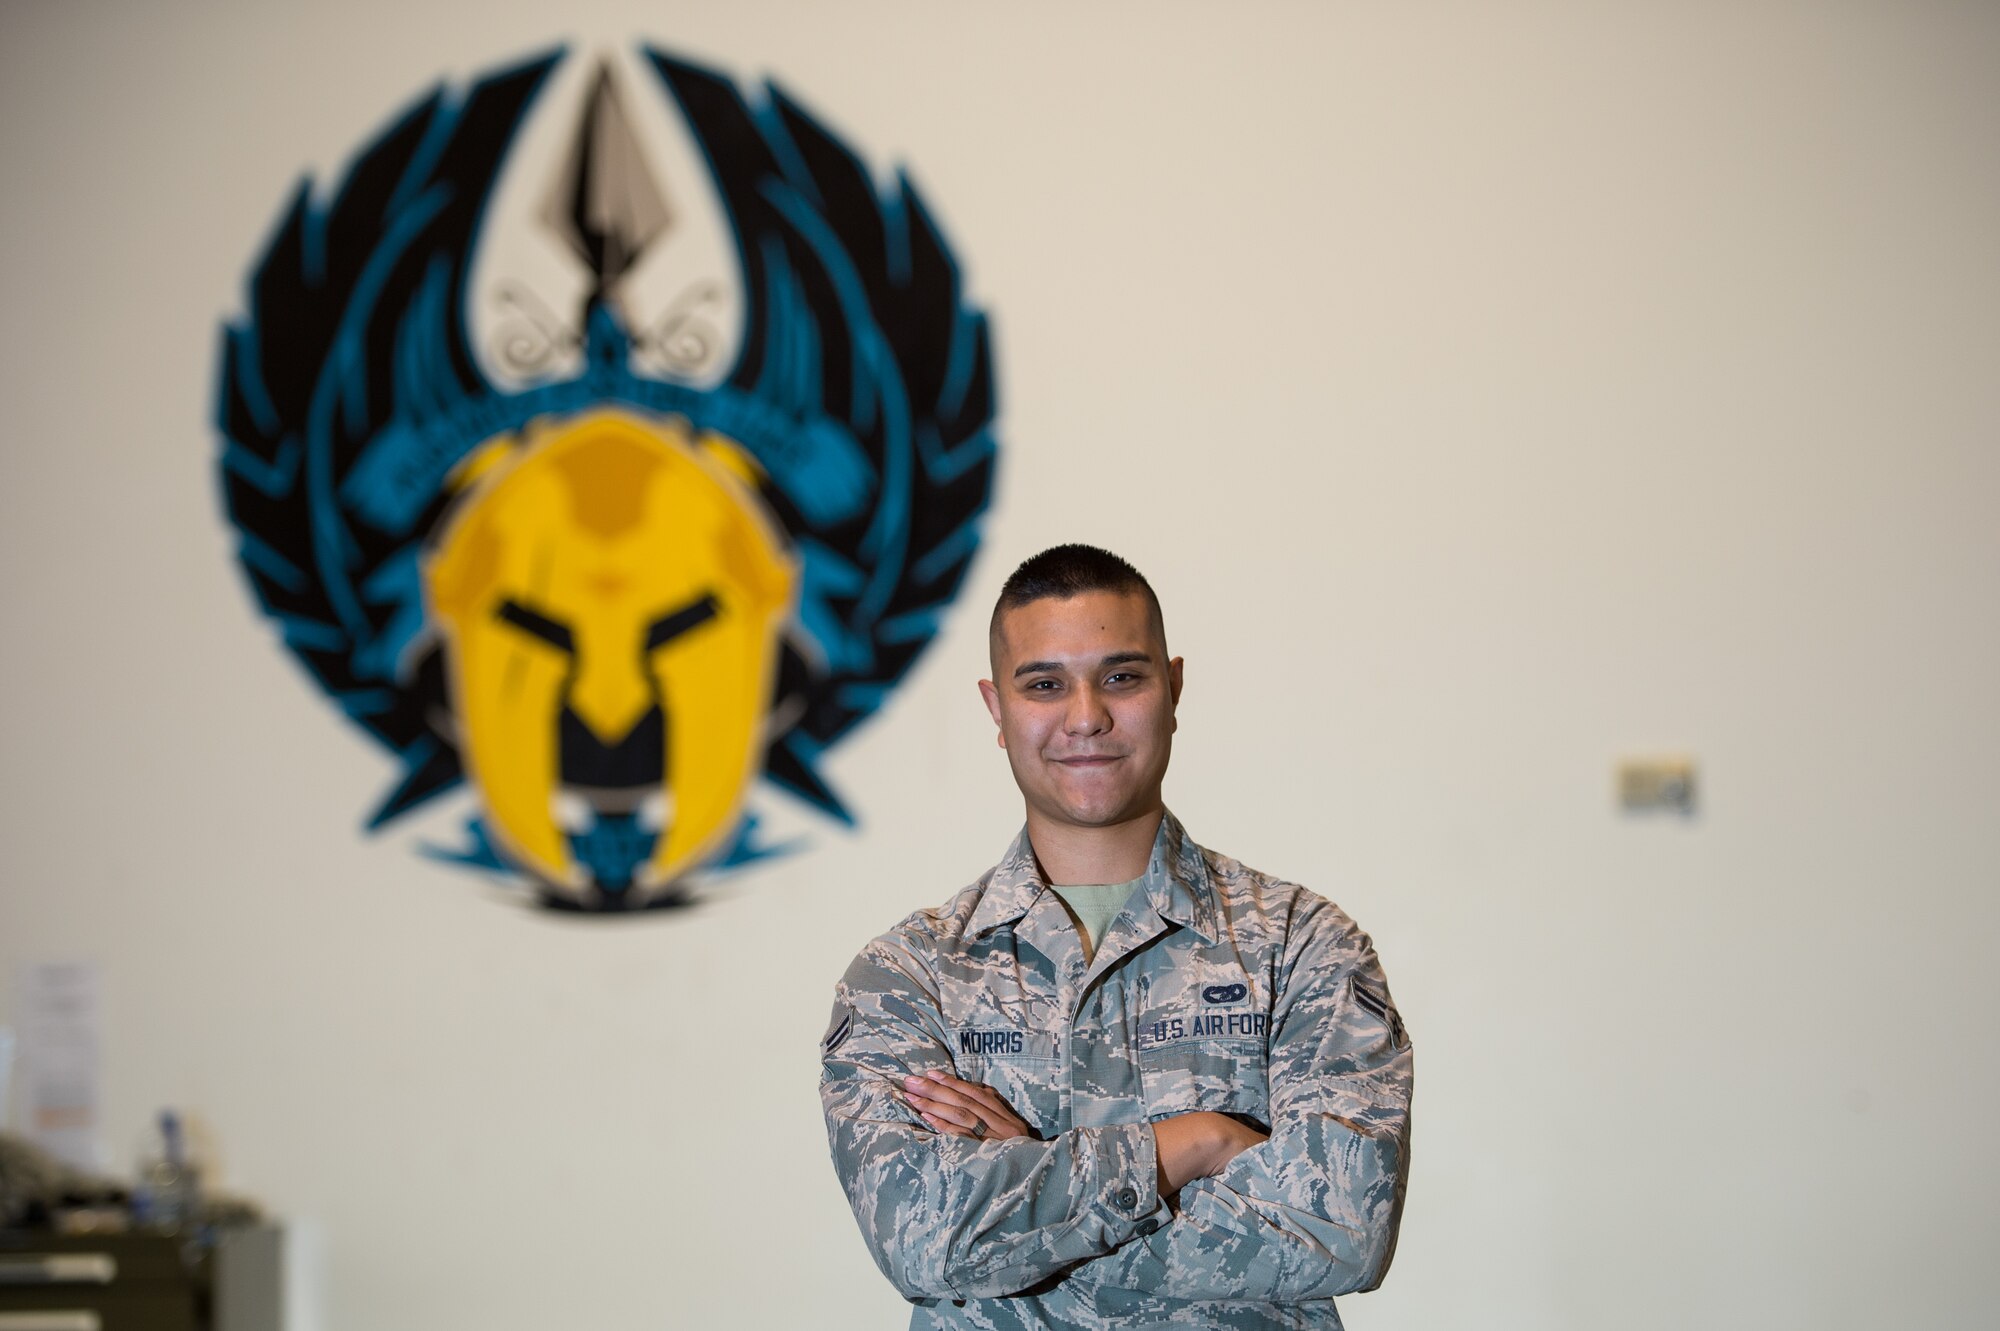 Airman 1st Class Benjamin Morris, 821st Contingency Response Squadron aerial porter, poses for a photograph at Travis Air Force Base, Calif., Spet. 6, 2016. (U.S. Air Force photo by Staff Sgt. Robert Hicks)